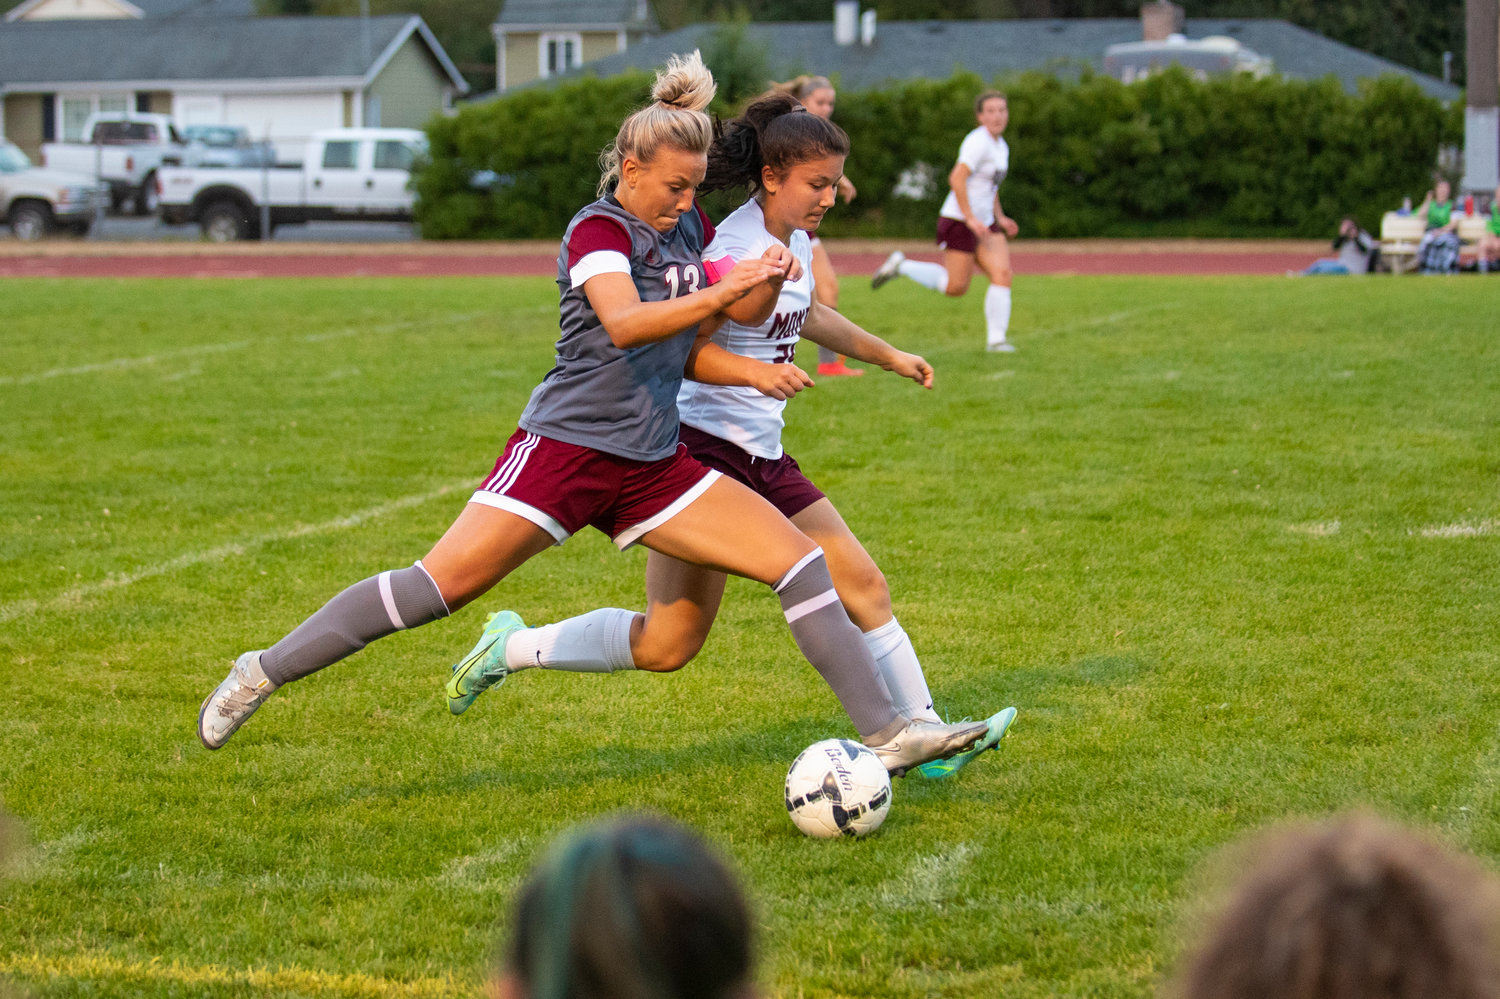 W.F. West junior midfielder Cam Sheets (13) battles with a Montesano player for possession during a non-league match at home on Tuesday.